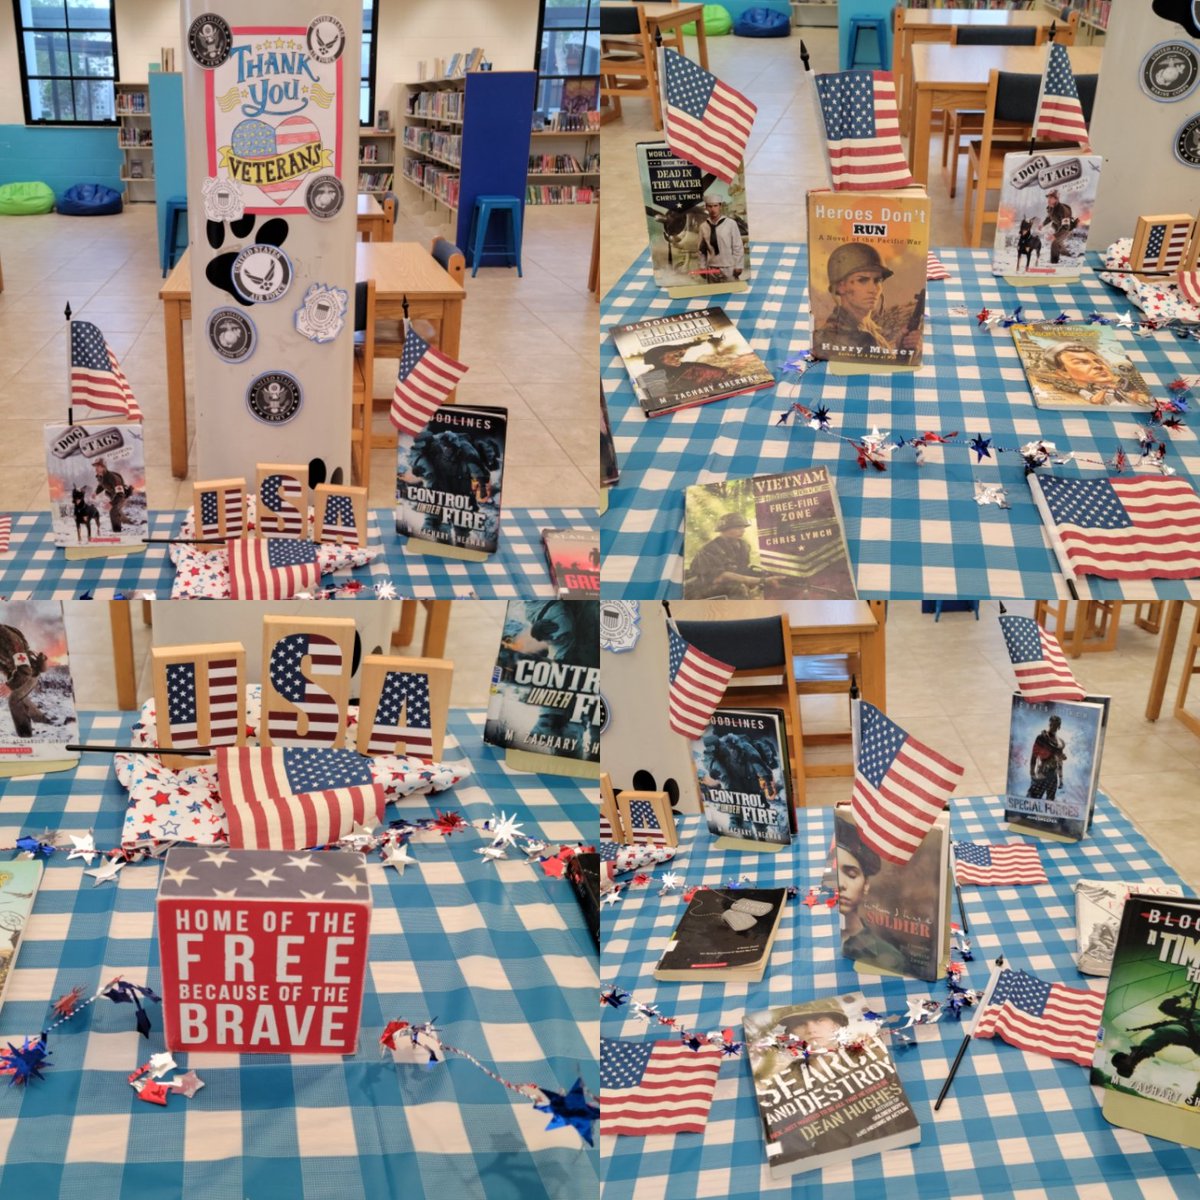 Honoring Veterans in our OMS Library book display. 
#homeofthefree
#ThankYouVeterans 
#betheblue💙
#bluenation🐾